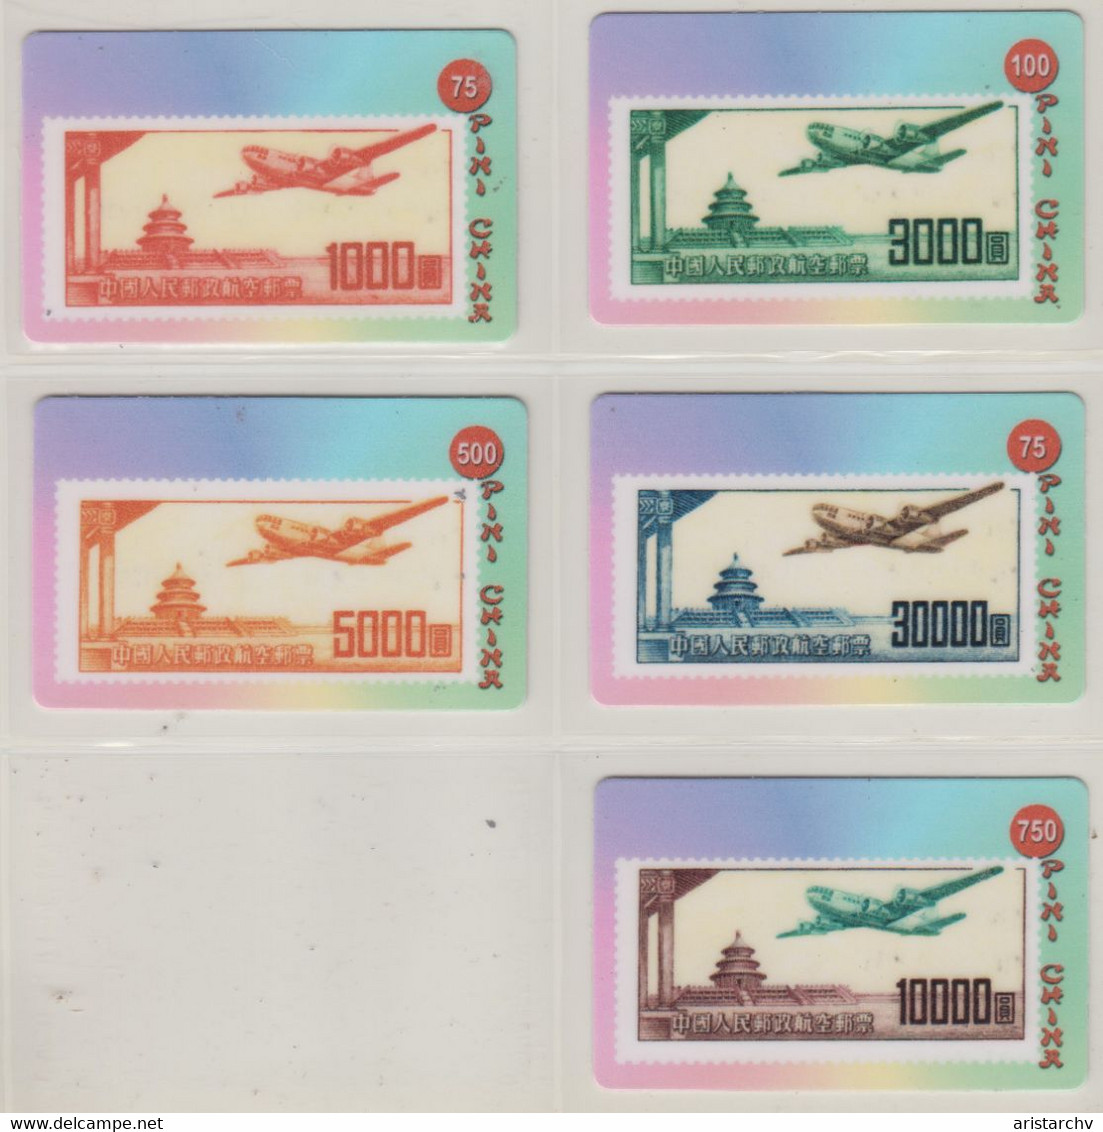 CHINA AVIATION PLANE STAMPS ON PHONE CARDS SET OF 5 CARDS - Stamps & Coins